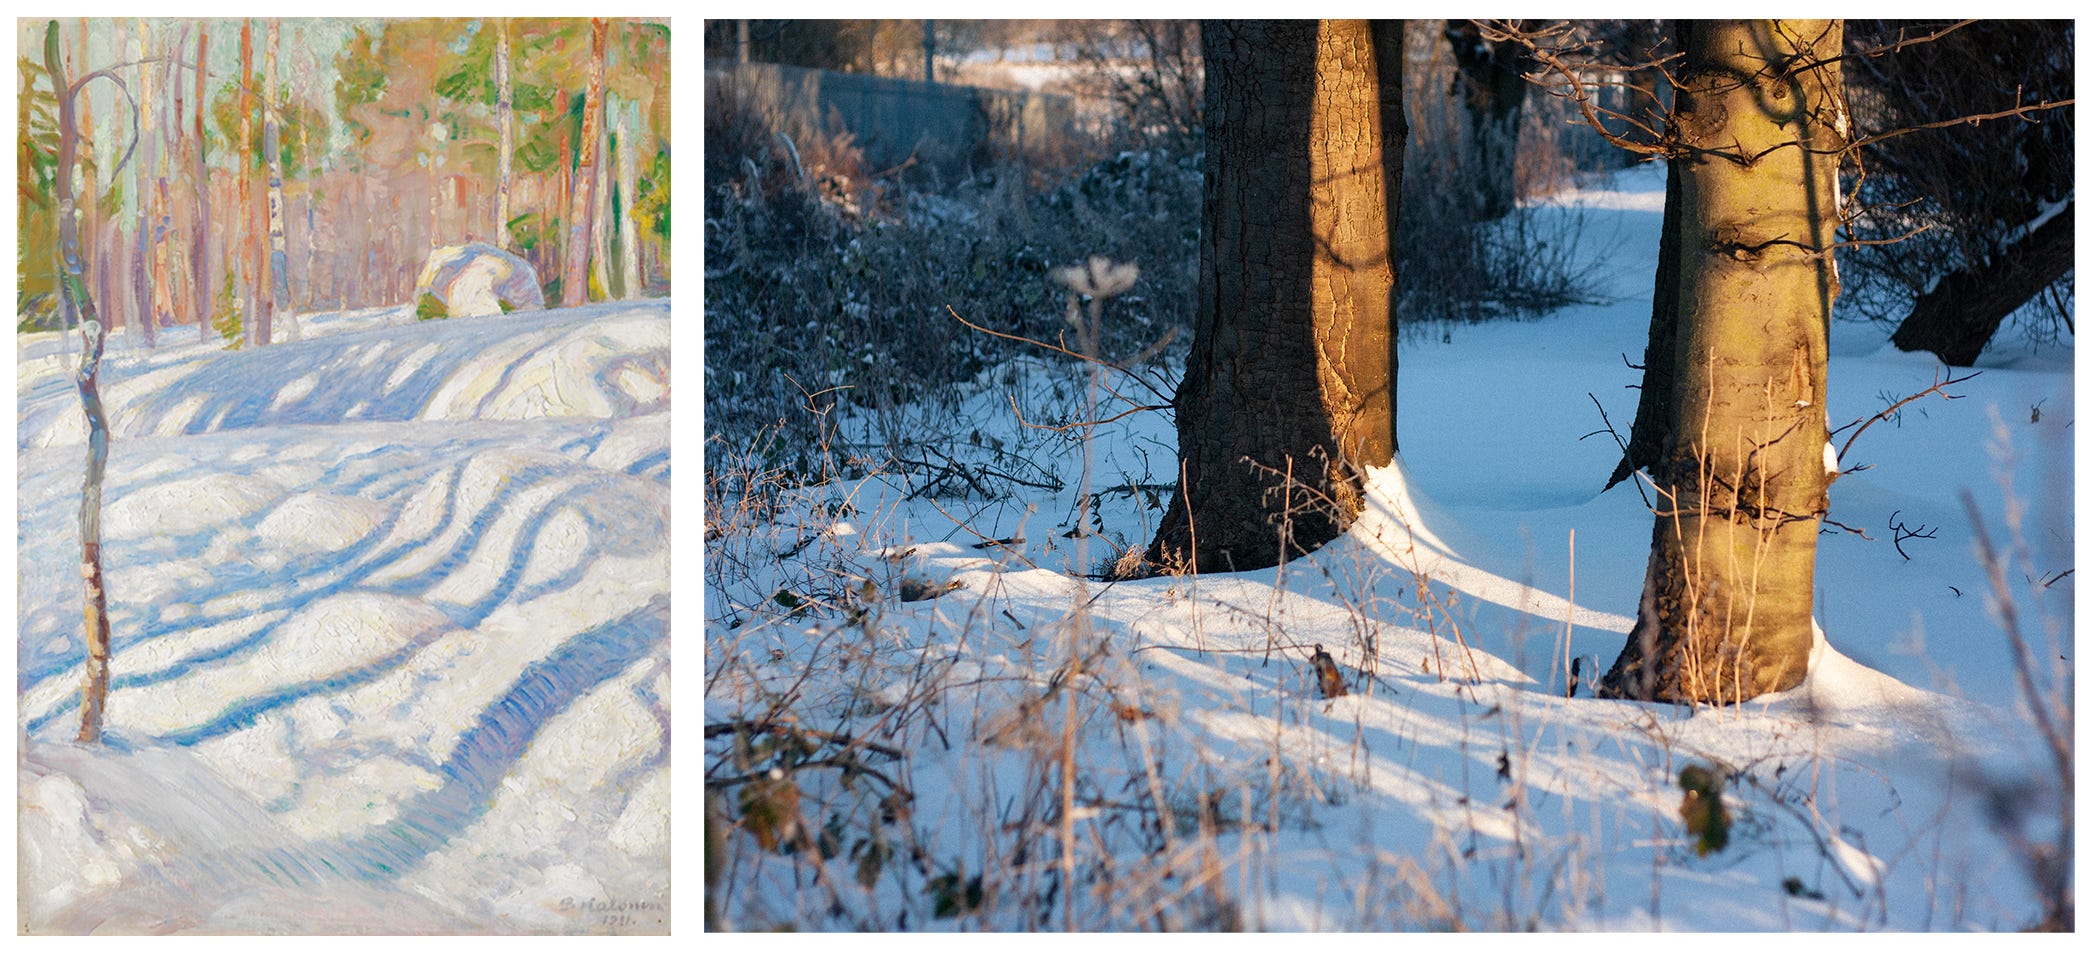 Right image is a bright painting of woods covered in snow, the trees are casting shadows on the snow covered ground and there are hints of bright green, orange and blues. Left image is a photograph of two tree trunks lit yellow in the sun, their shadows casting blue over the snowy ground.